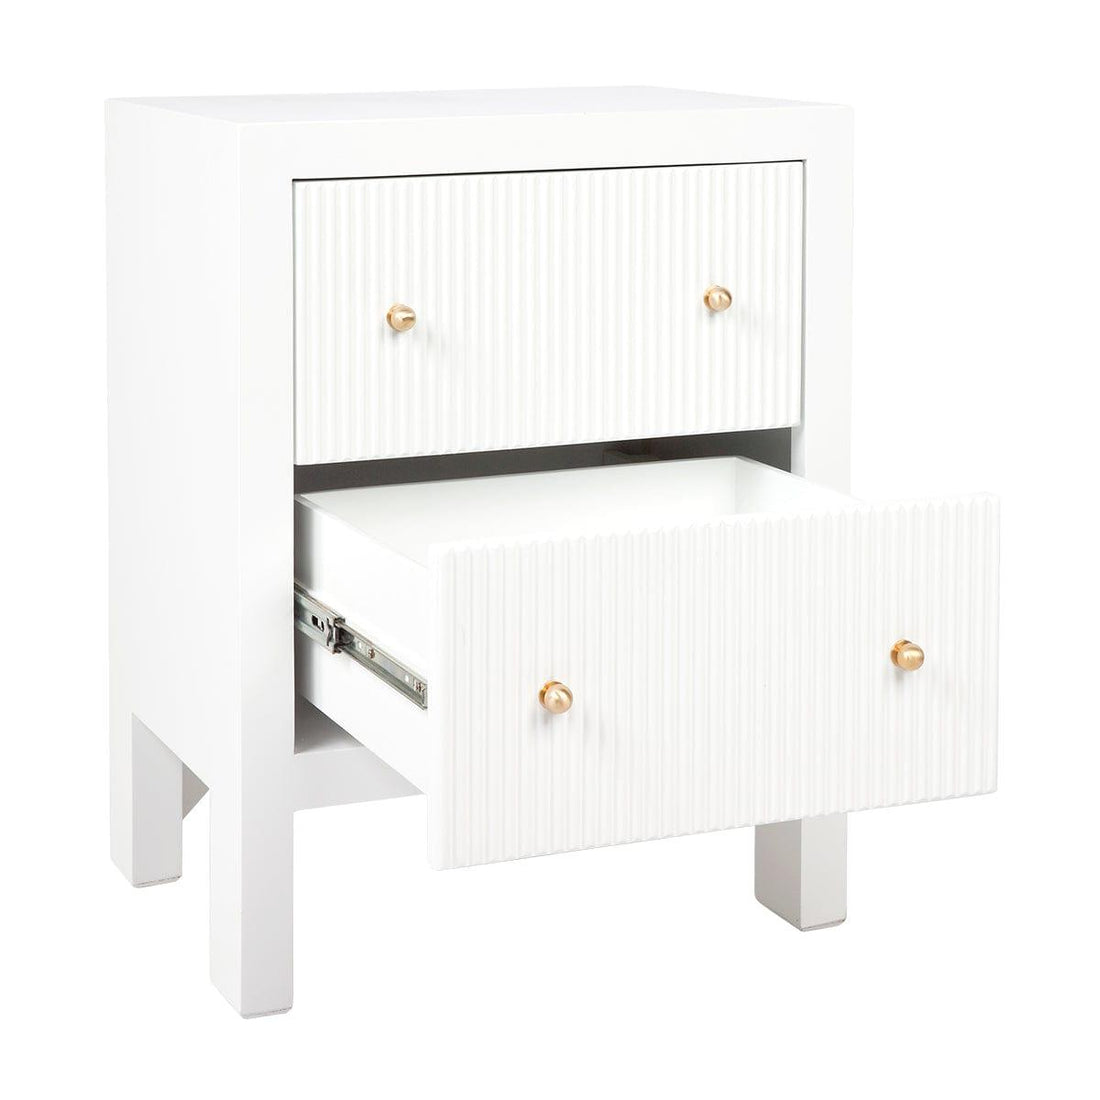 House Journey Ariana Bedside Table - Small White